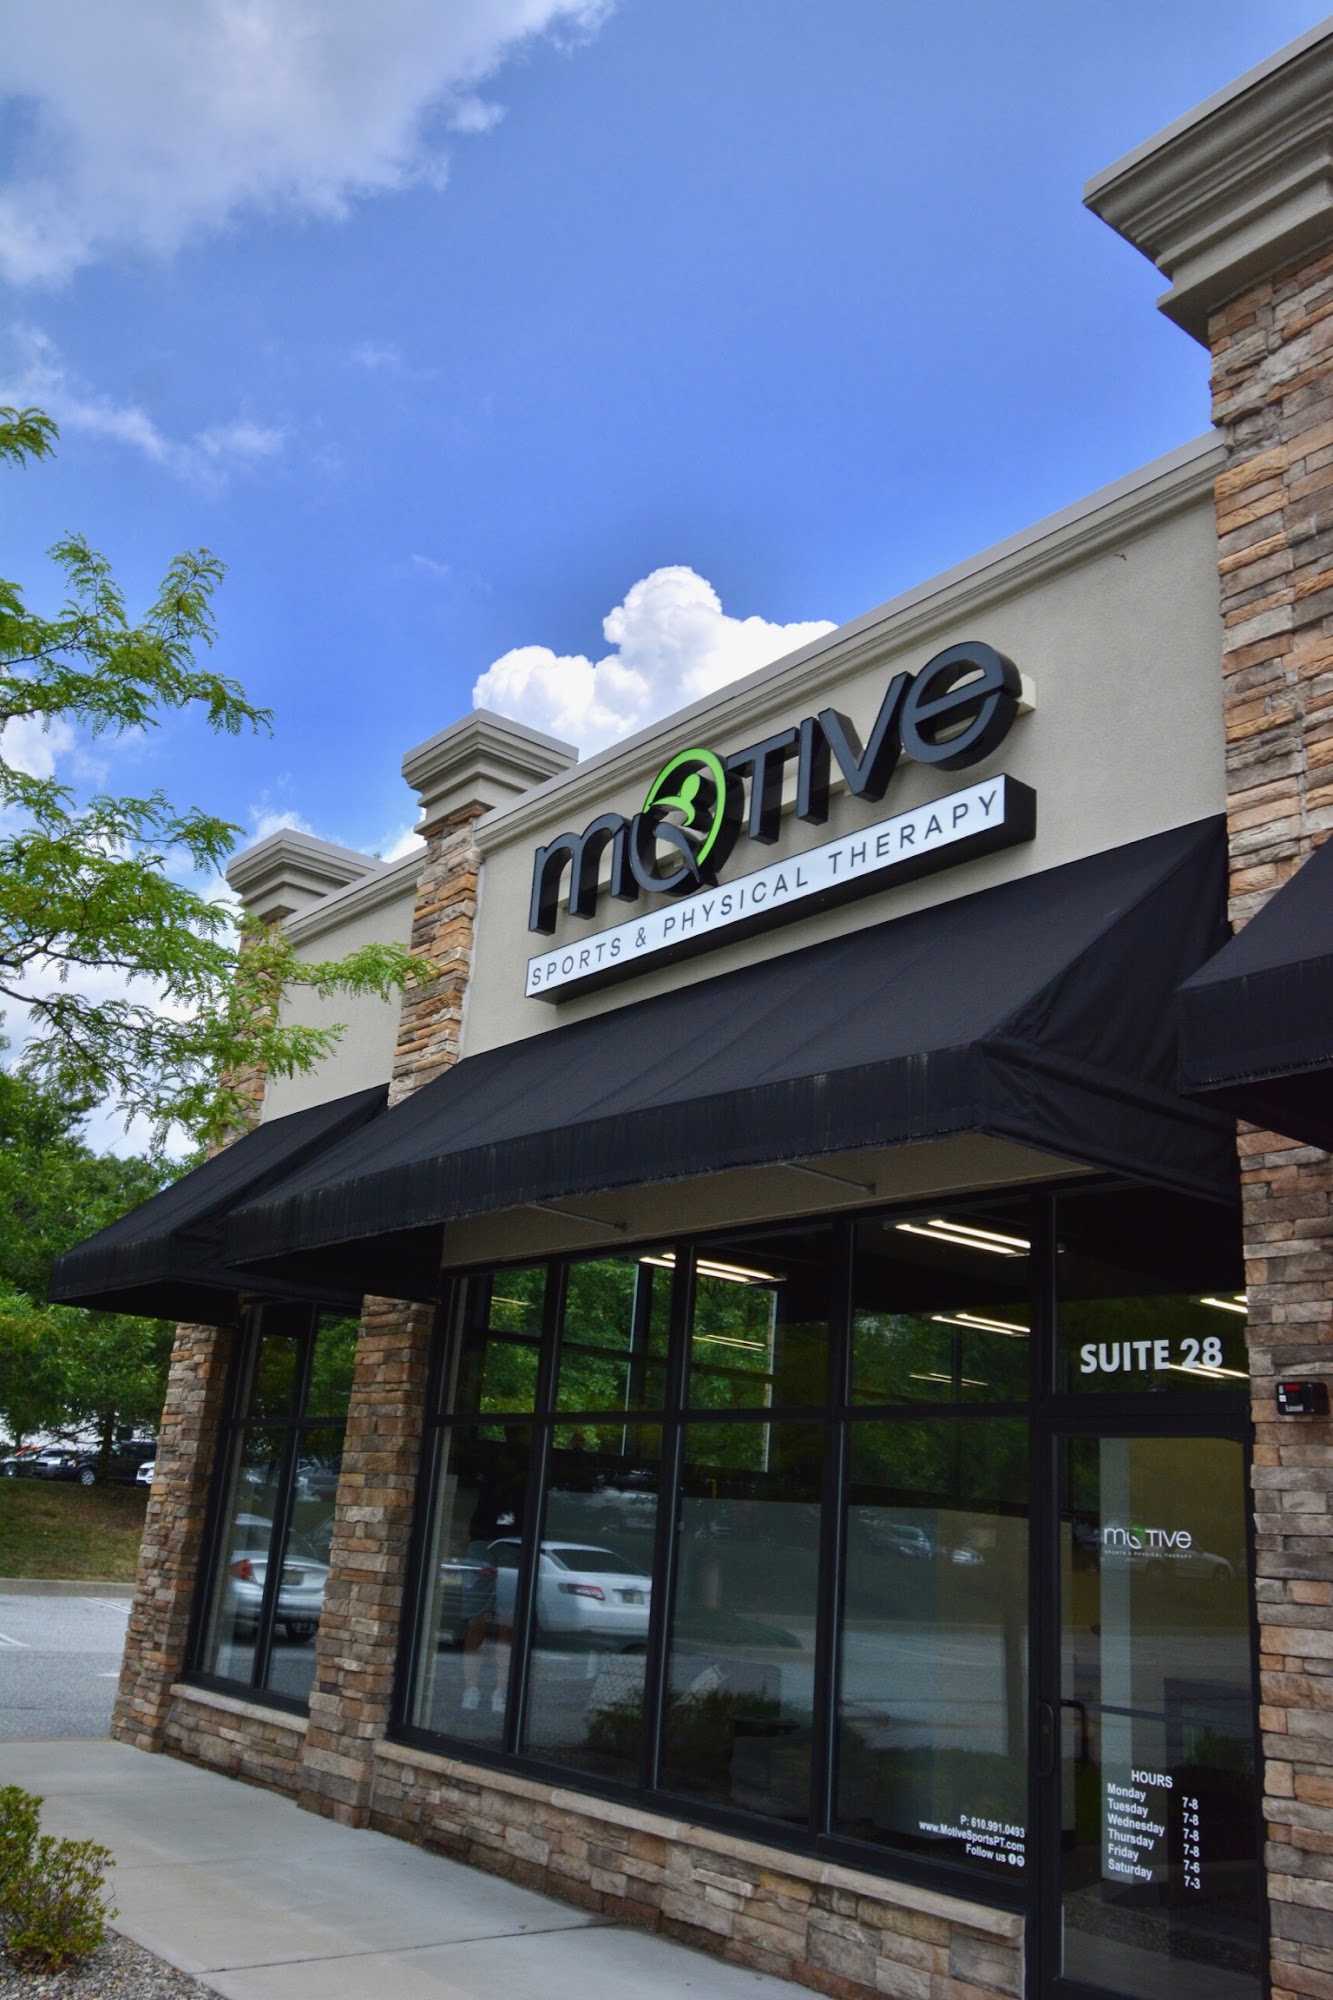 Motive Sports & Physical Therapy 91 Wilmington West Chester Pike Suite 28, Chadds Ford Pennsylvania 19317